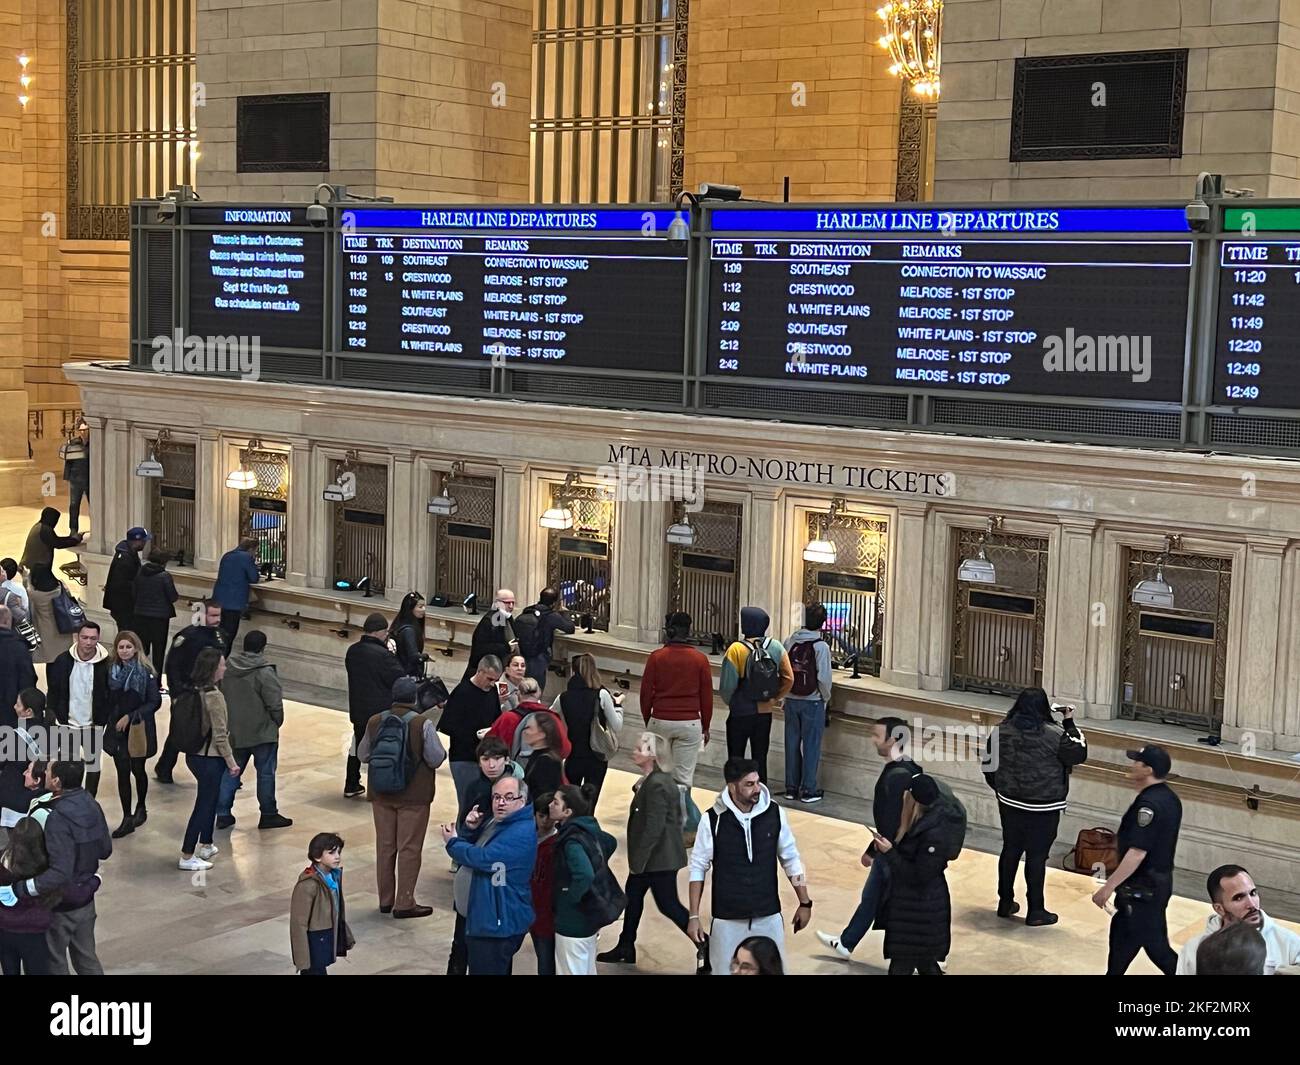 Ticket counter at Grand Central Station in the main hall in Manhattan, New York City. Stock Photo